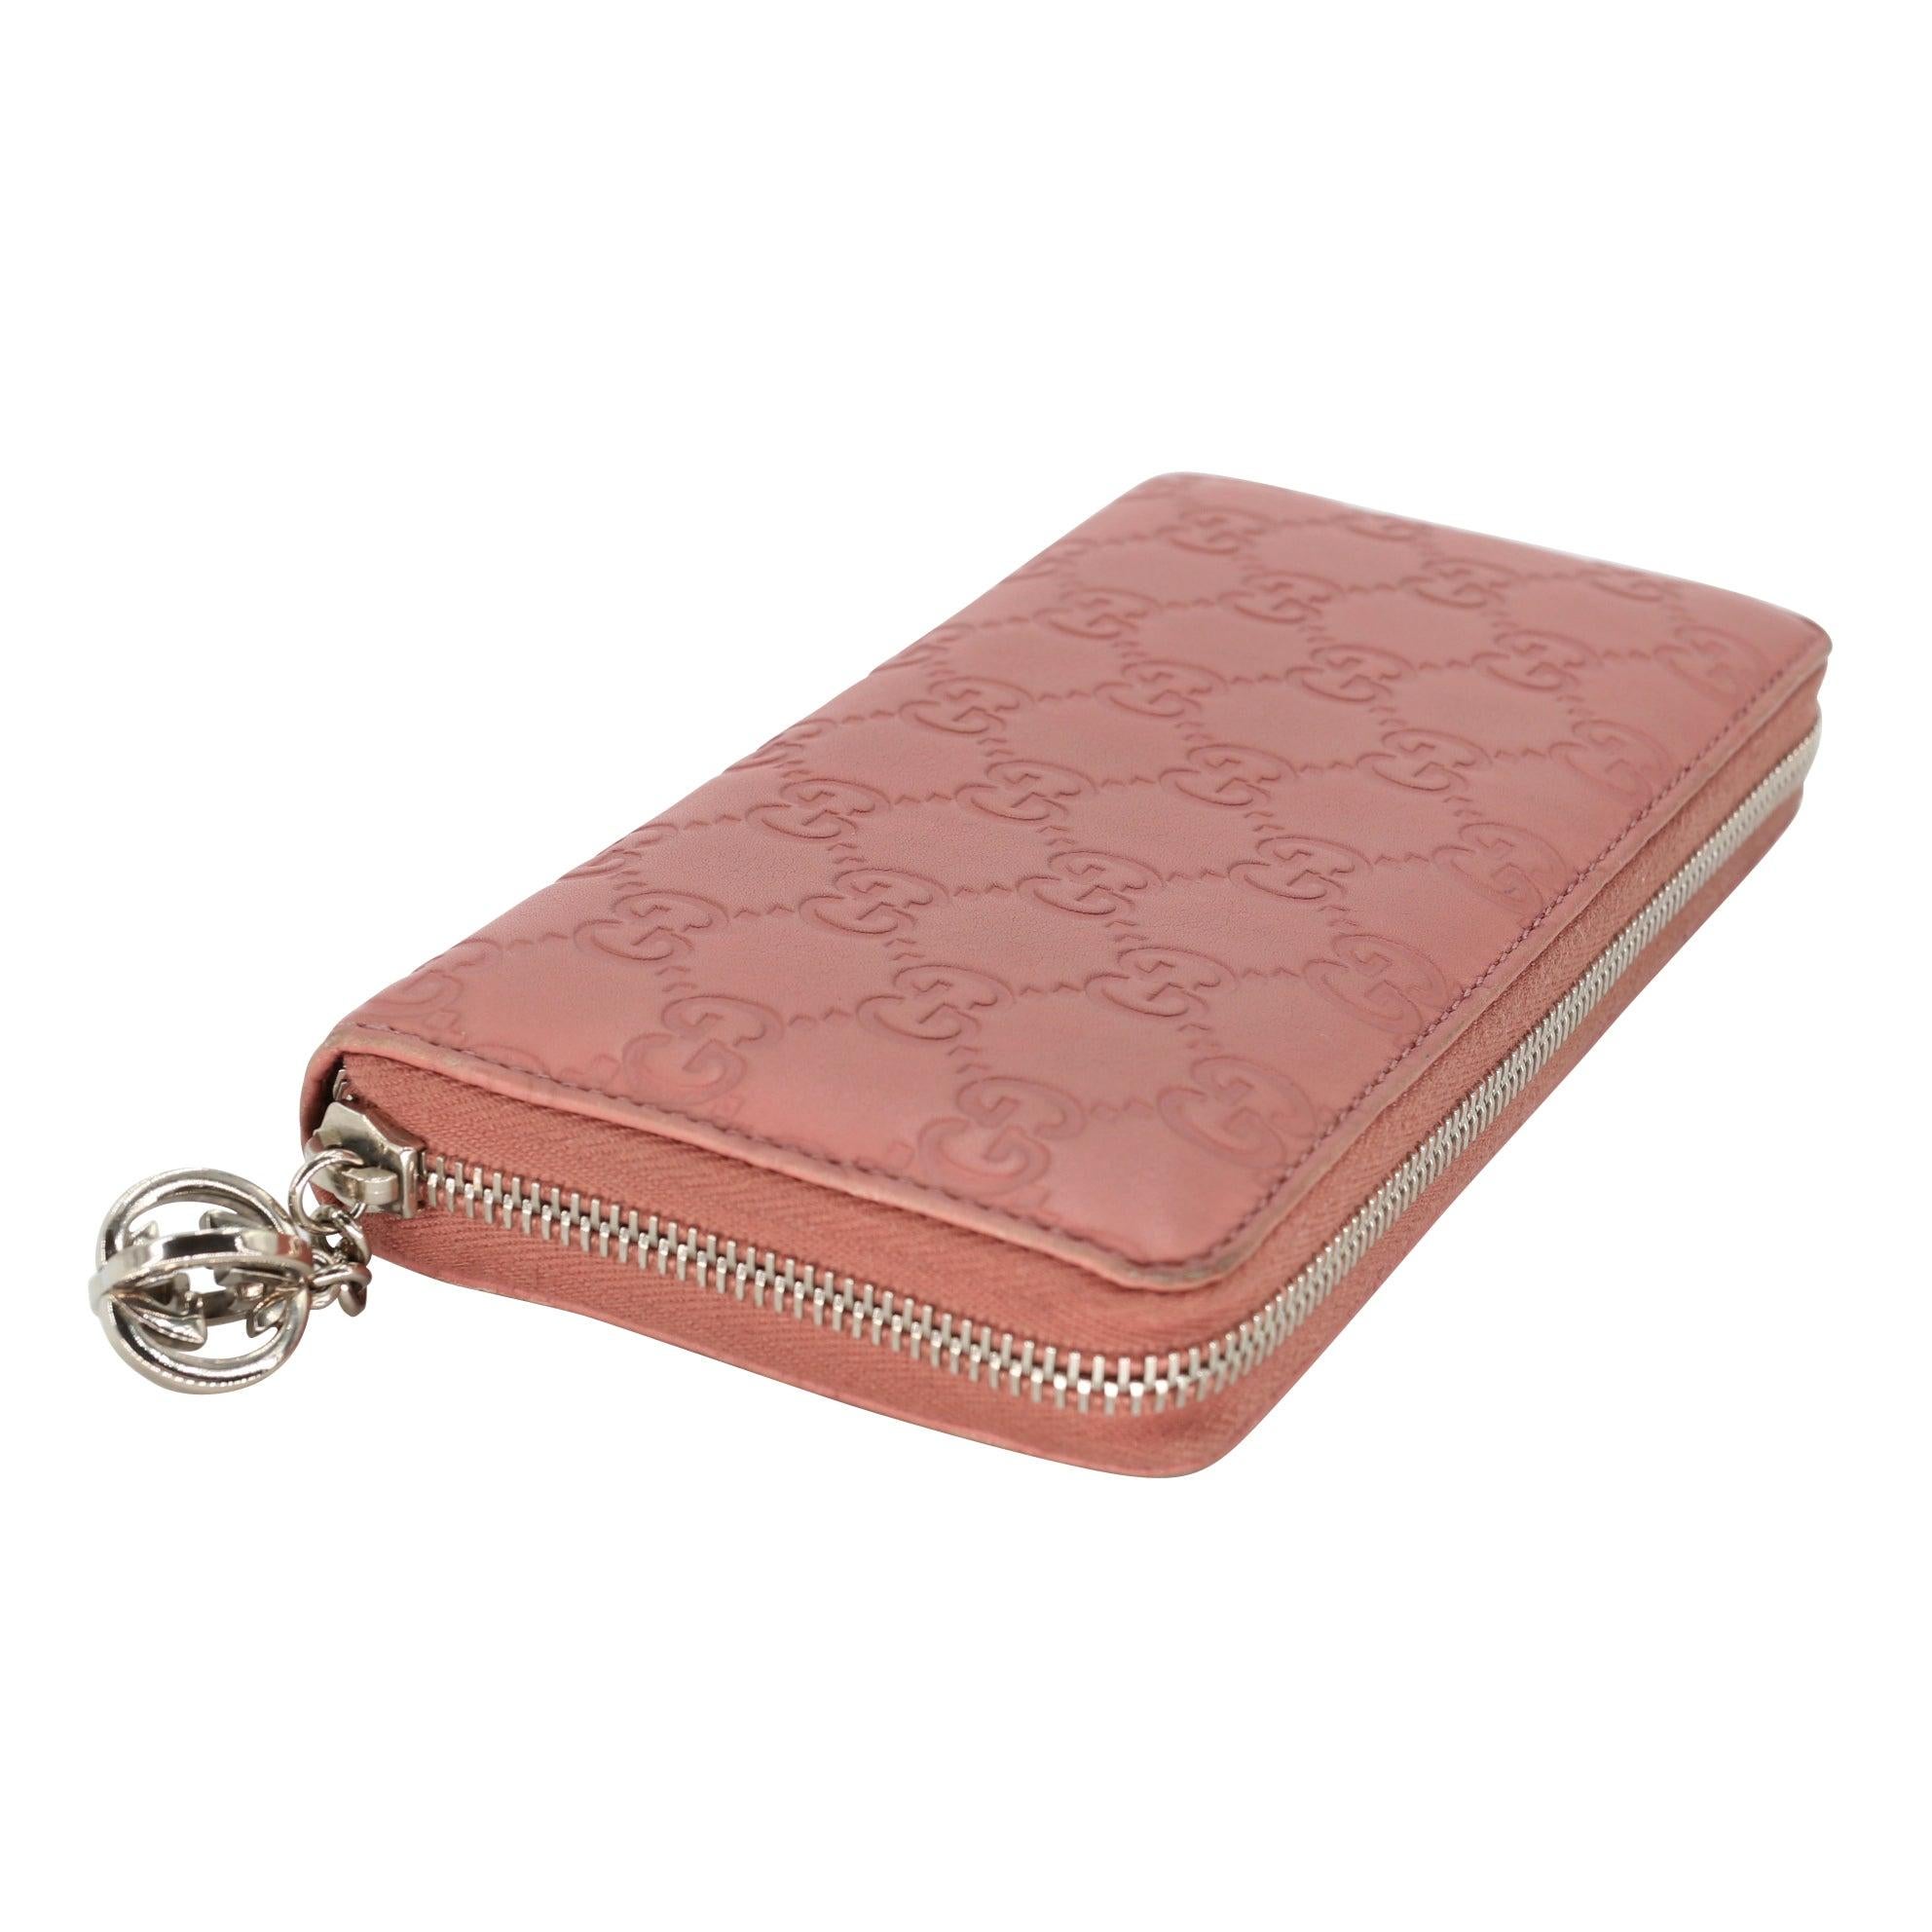 Gucci GG Guccissima Pink Leather Zip Around Wallet LV-W1110P-A003 For Sale 1